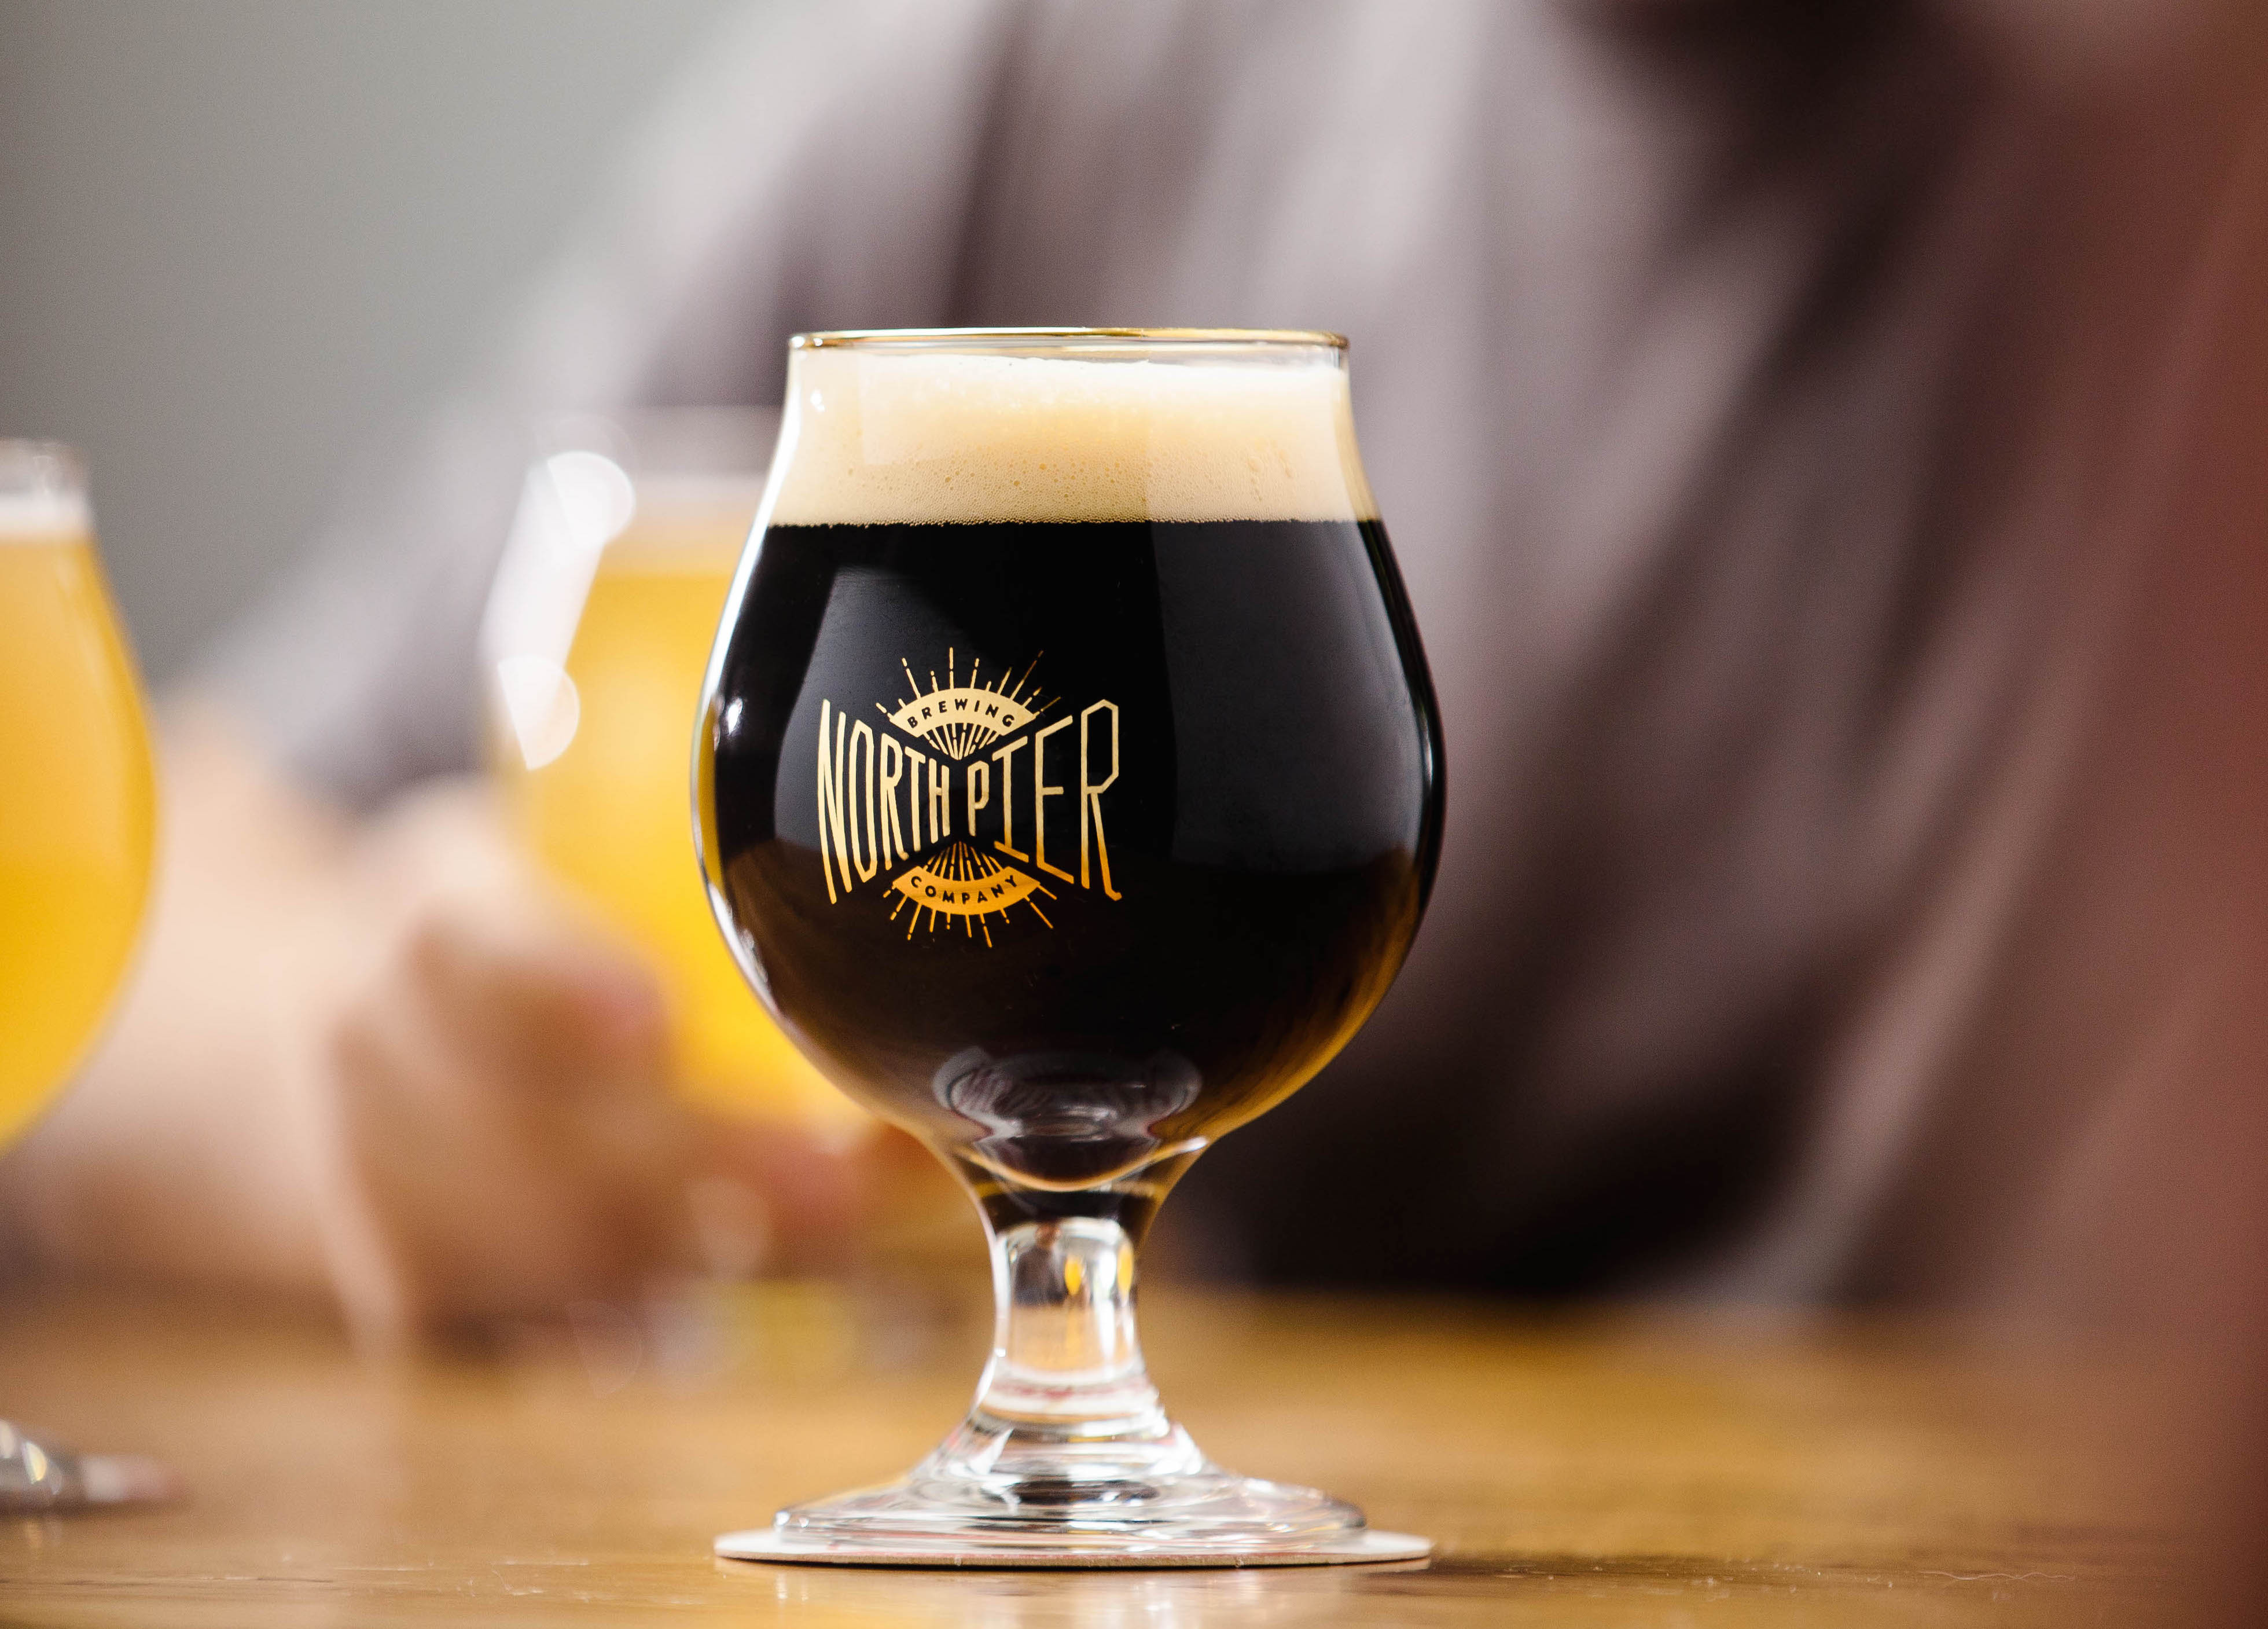 Old Shuck features a deep, dark brown color that belies the medium-body and low-bitterness of this classic London porter.